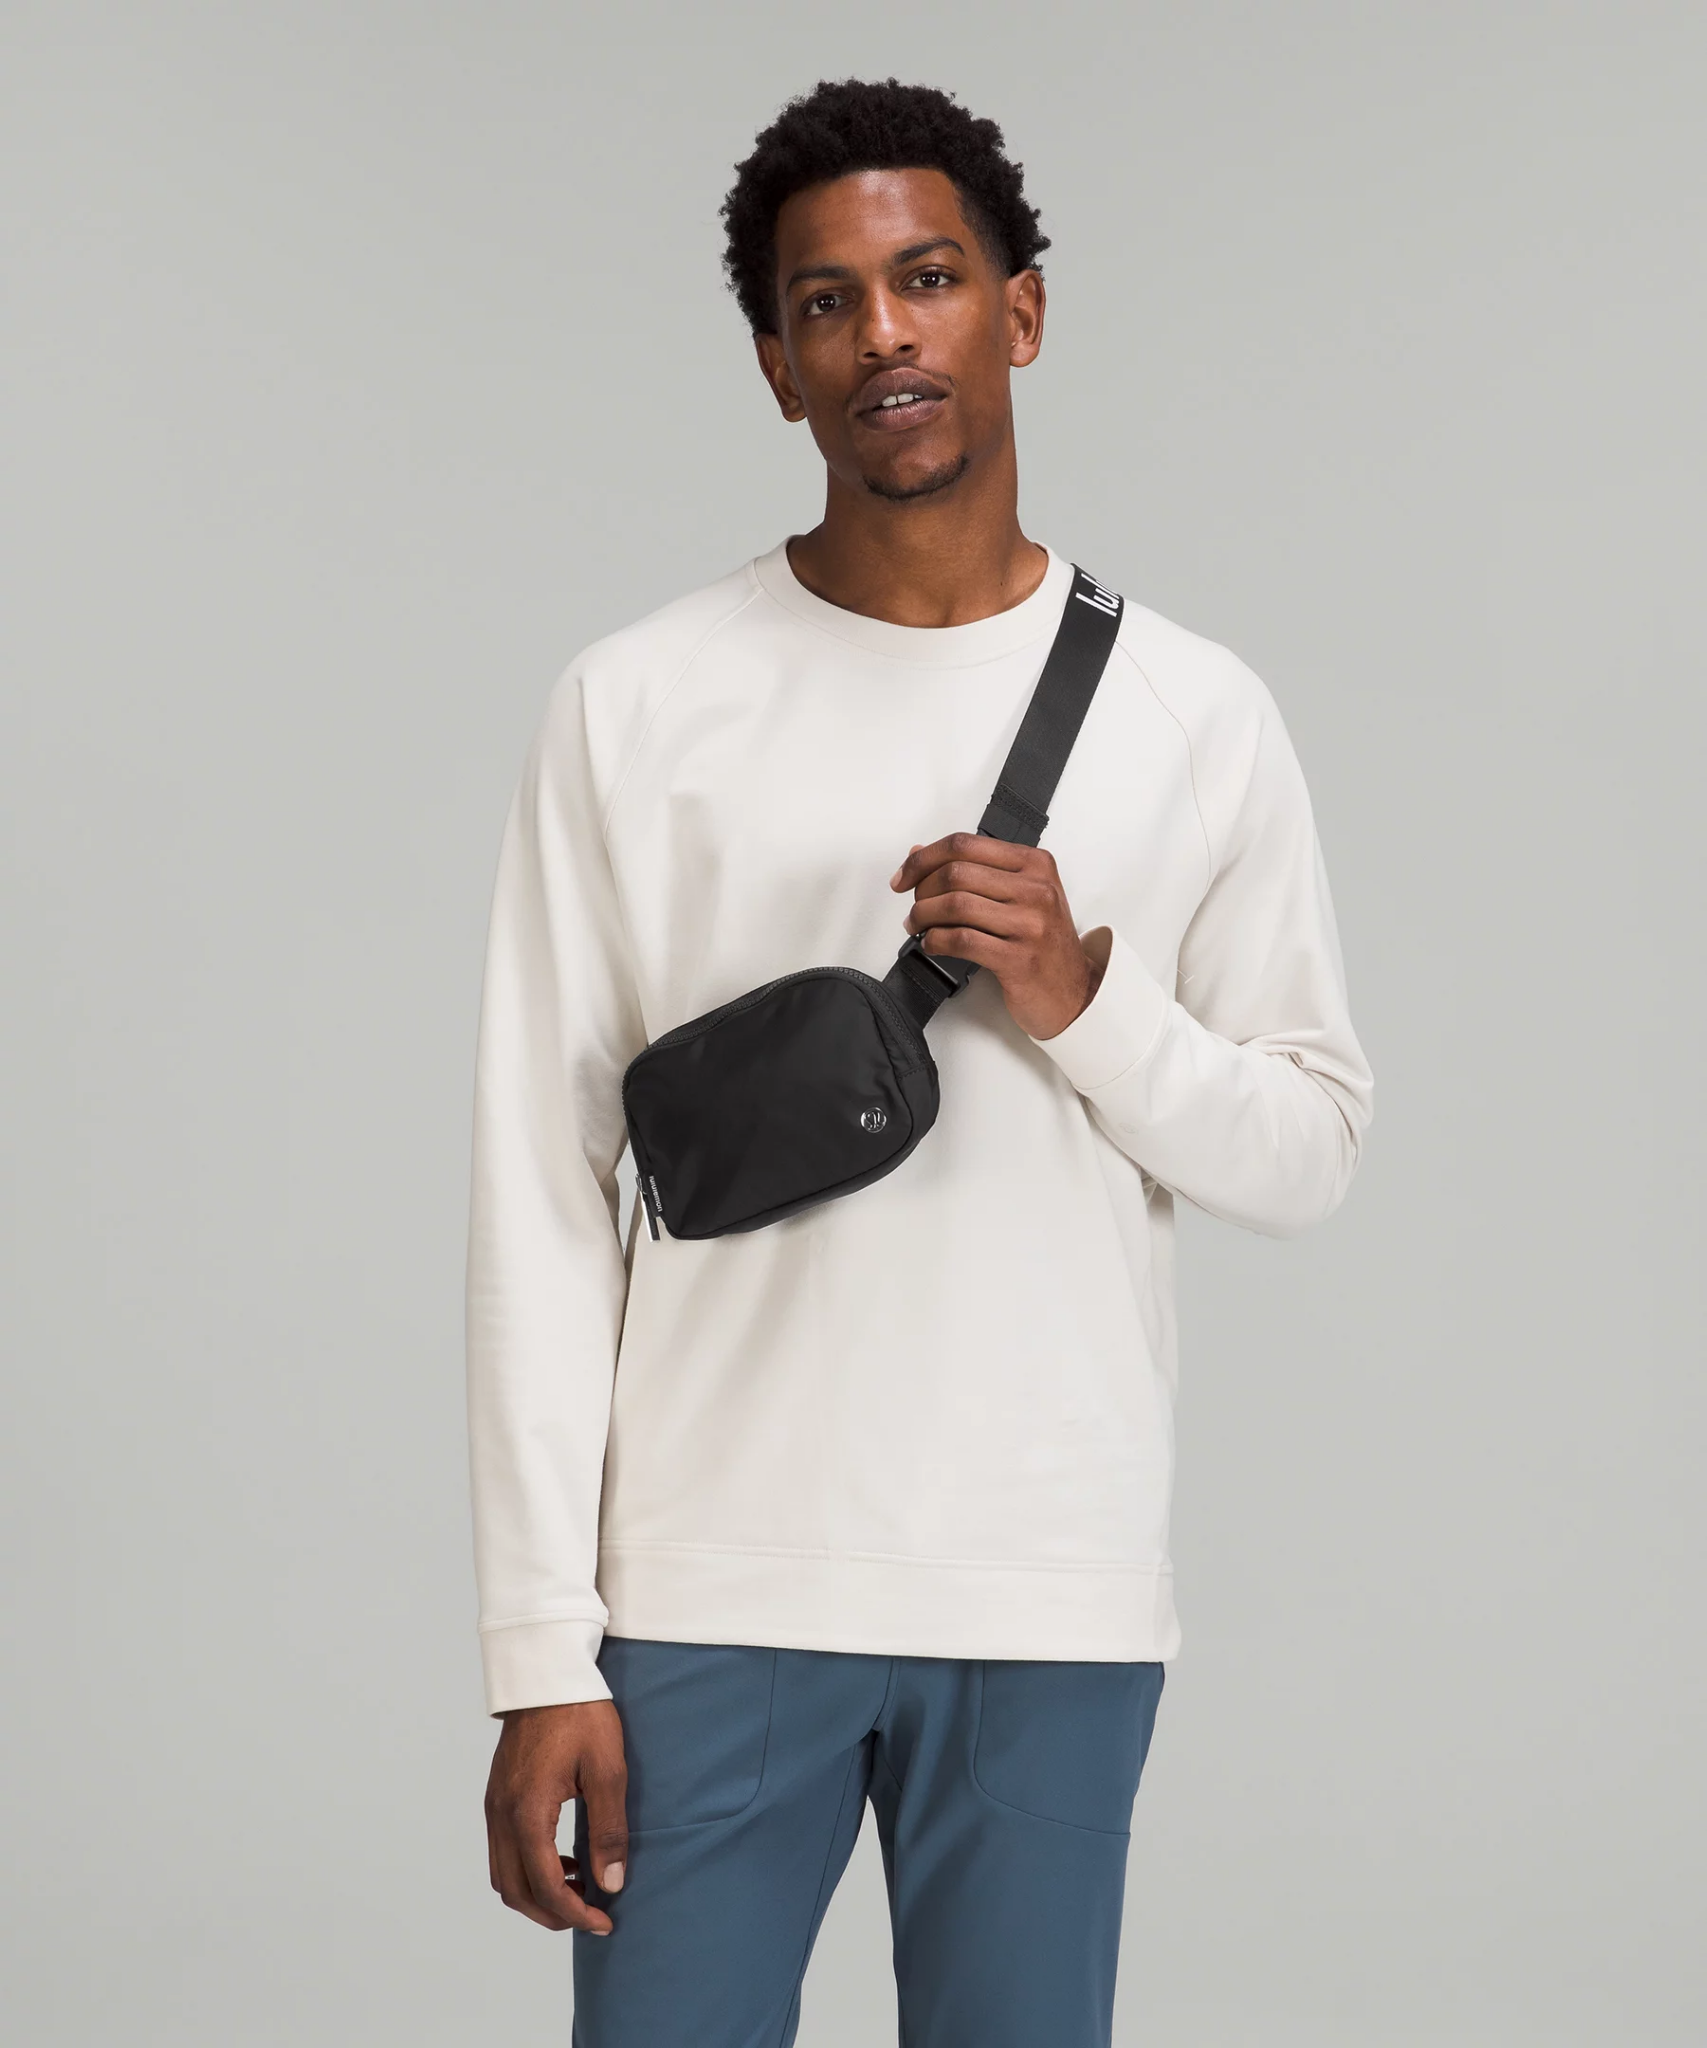 Good Design: The Fanny Pack — The BYU Design Review